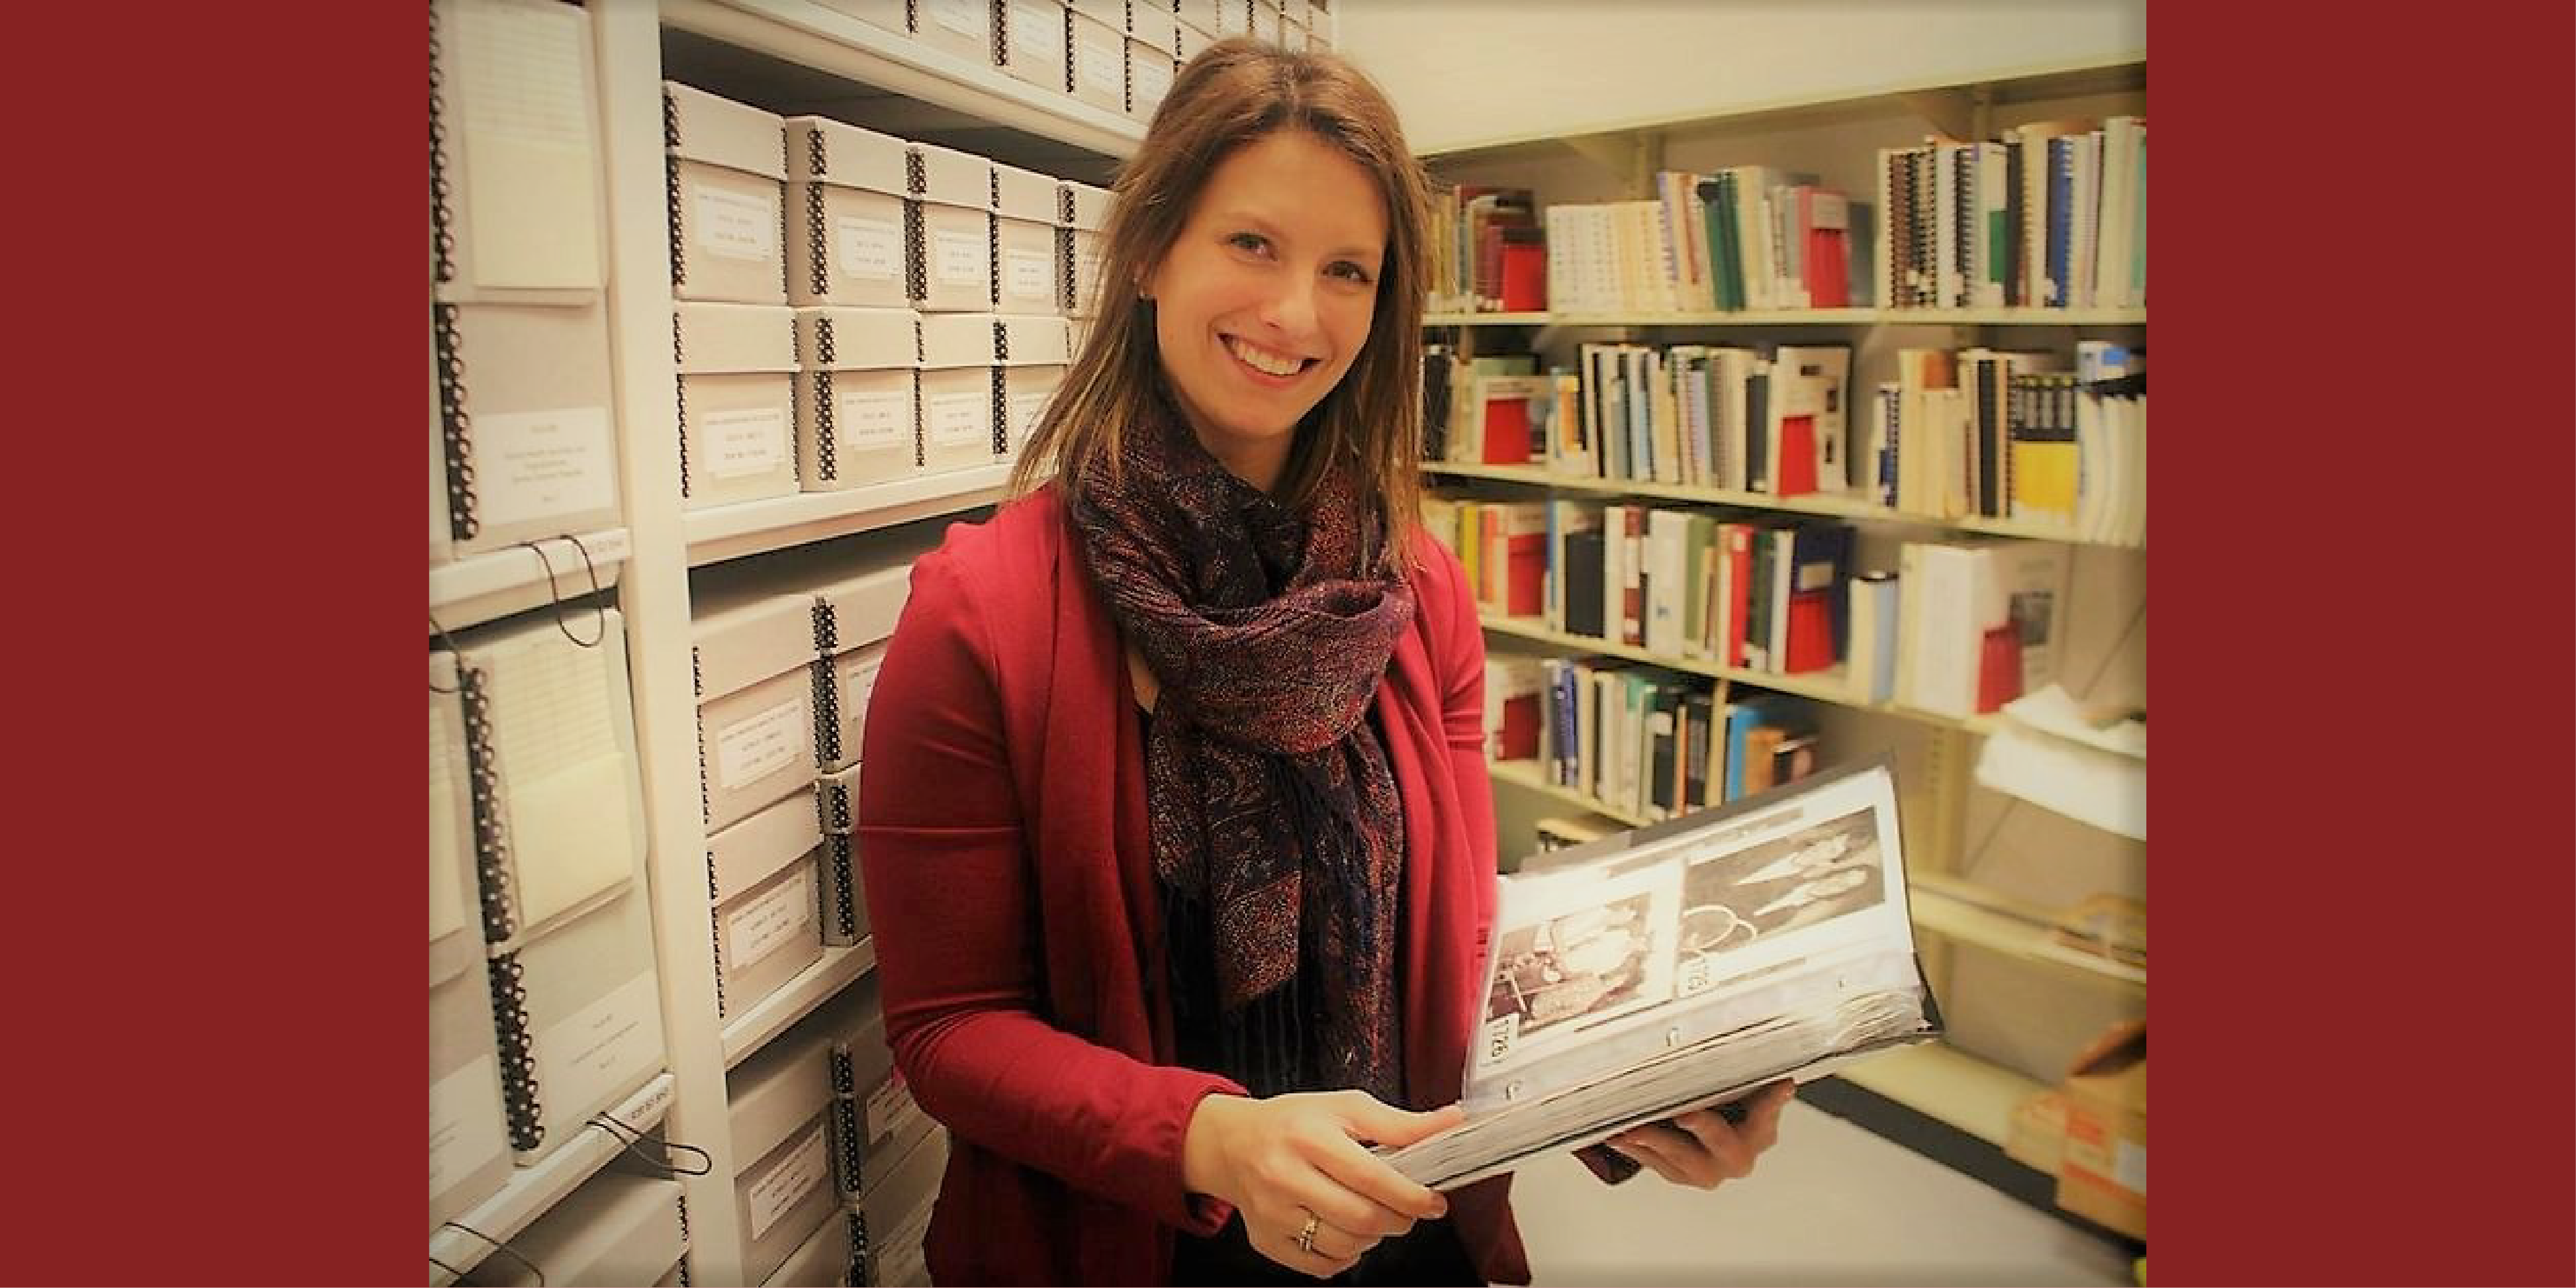 Archivist Nicole Aszalos holds photos in collections storage at Lambton County Archives. Photo by Paul Morden / The Observer